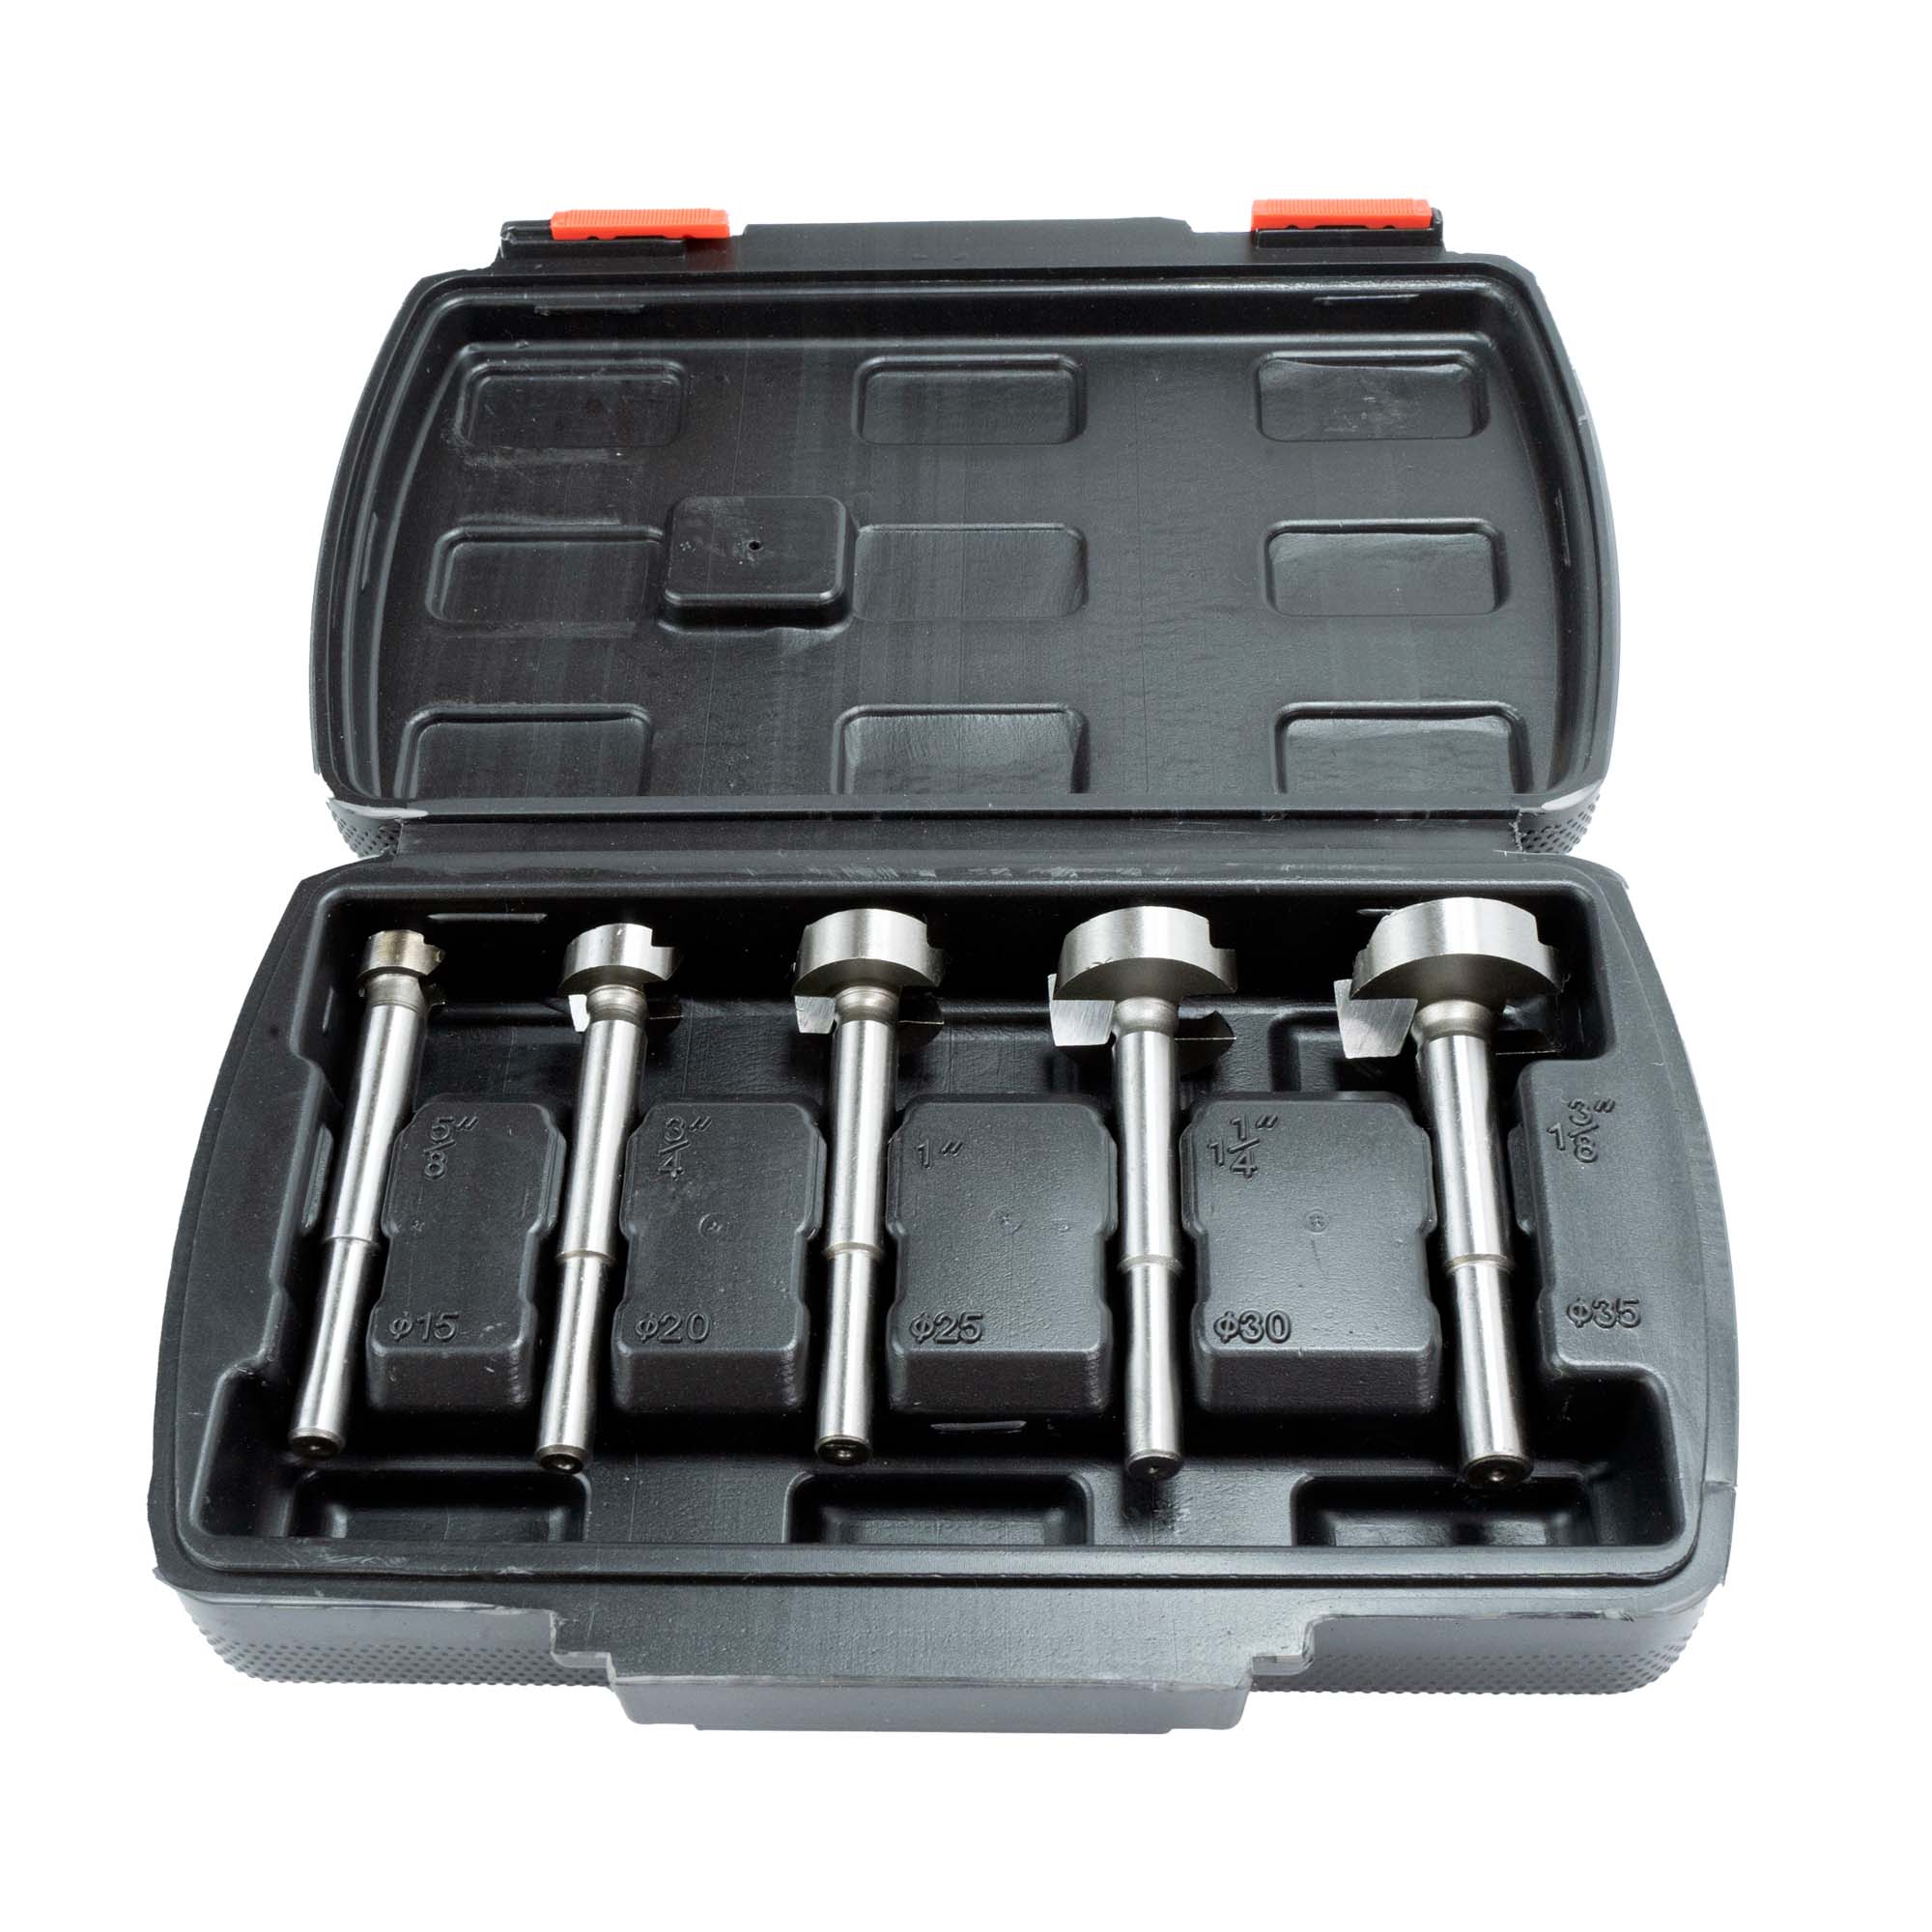 Forstner Bit Set 48595 - 5pc 15,20,25,30 and 35mm - Rolson Tools